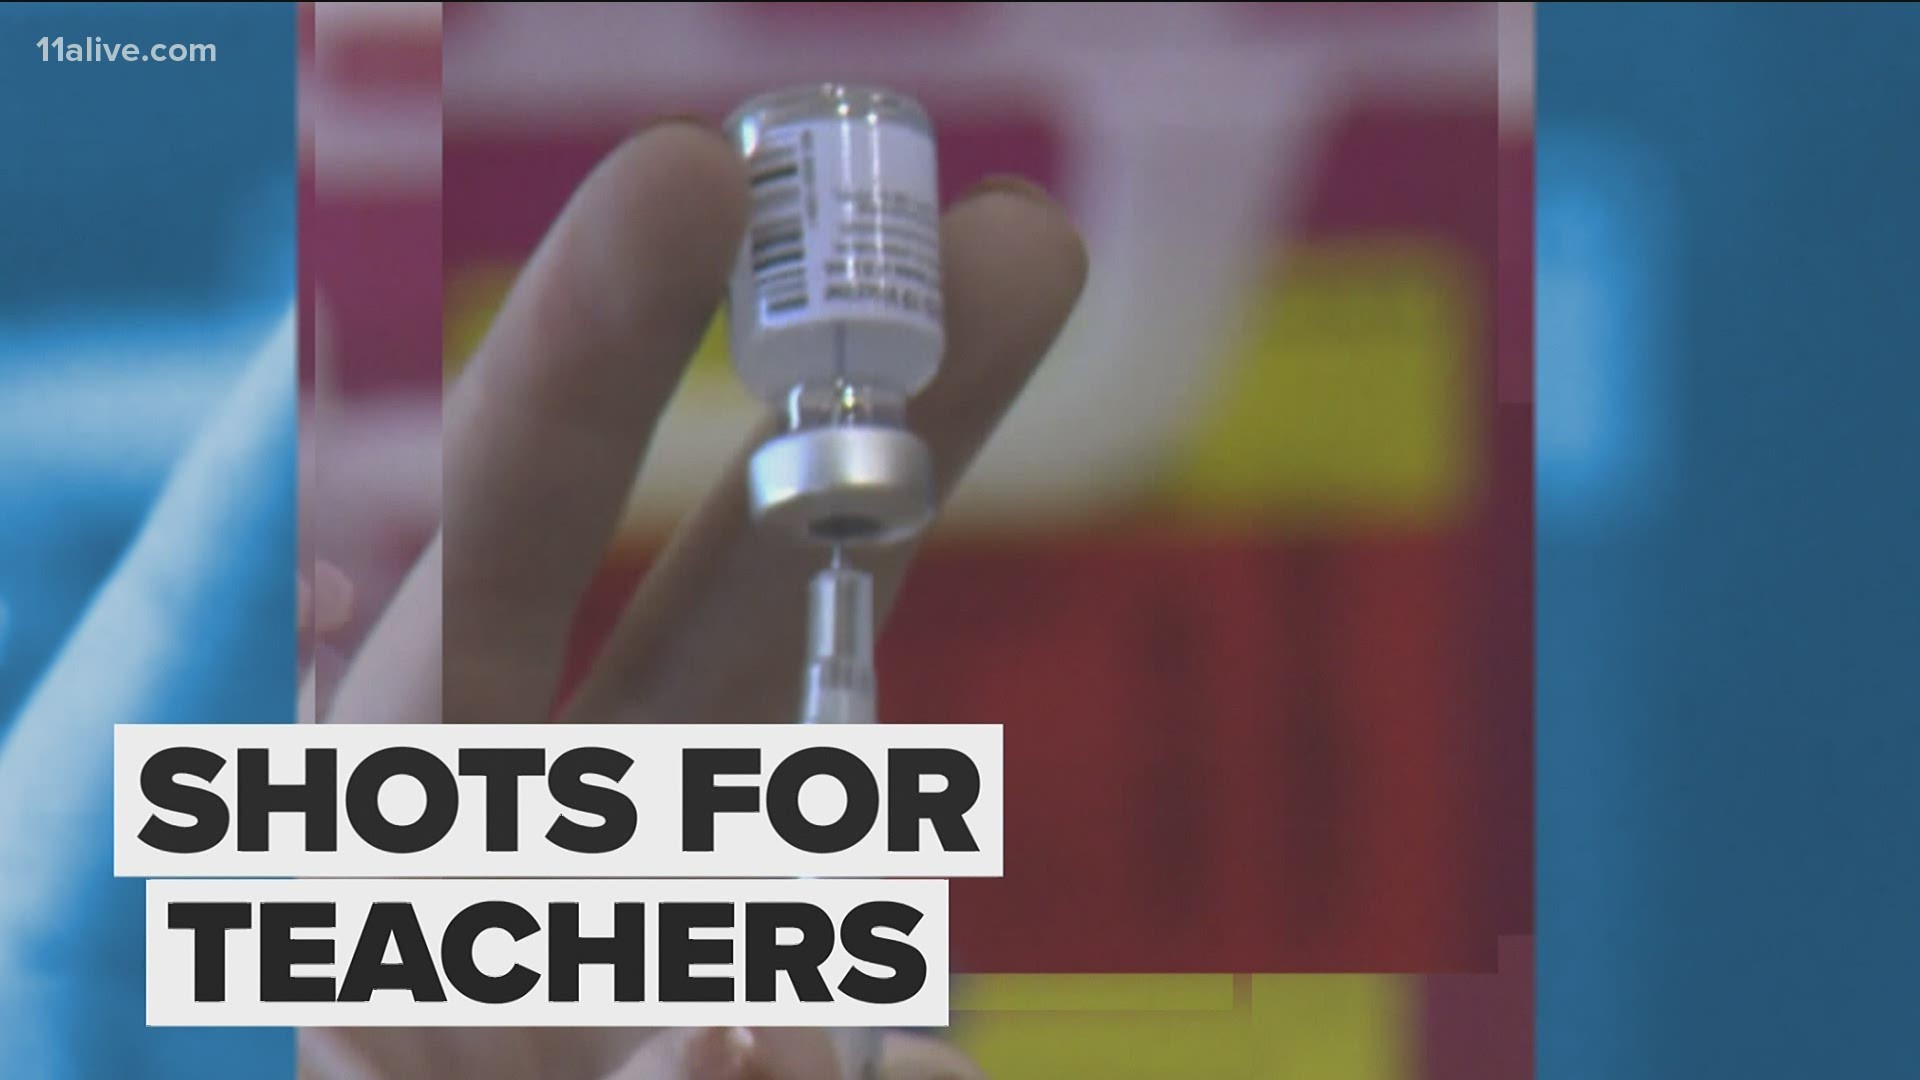 If teachers decide to get vaccinated through their school district, they could be waiting weeks, depending on where they teach. Each district has its own timeline.